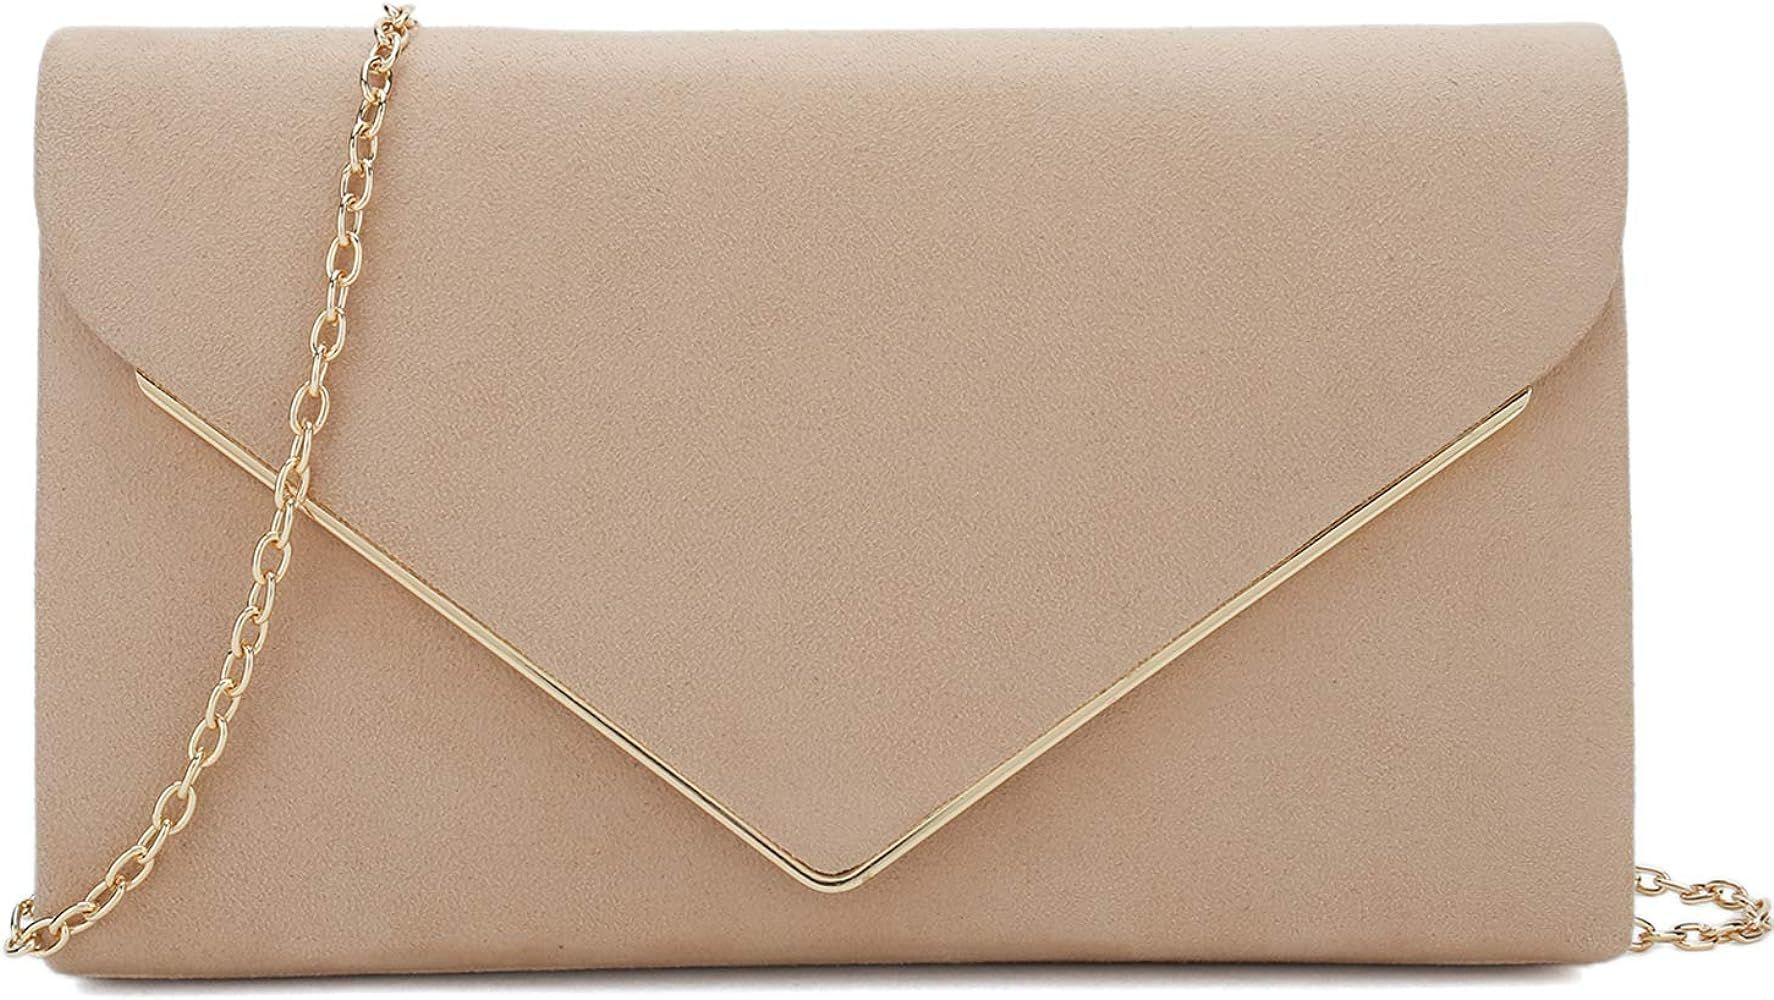 Charming Tailor Faux Suede Clutch Bag Elegant Metal Binding Evening Purse for Wedding/Prom/Black-Tie | Amazon (US)